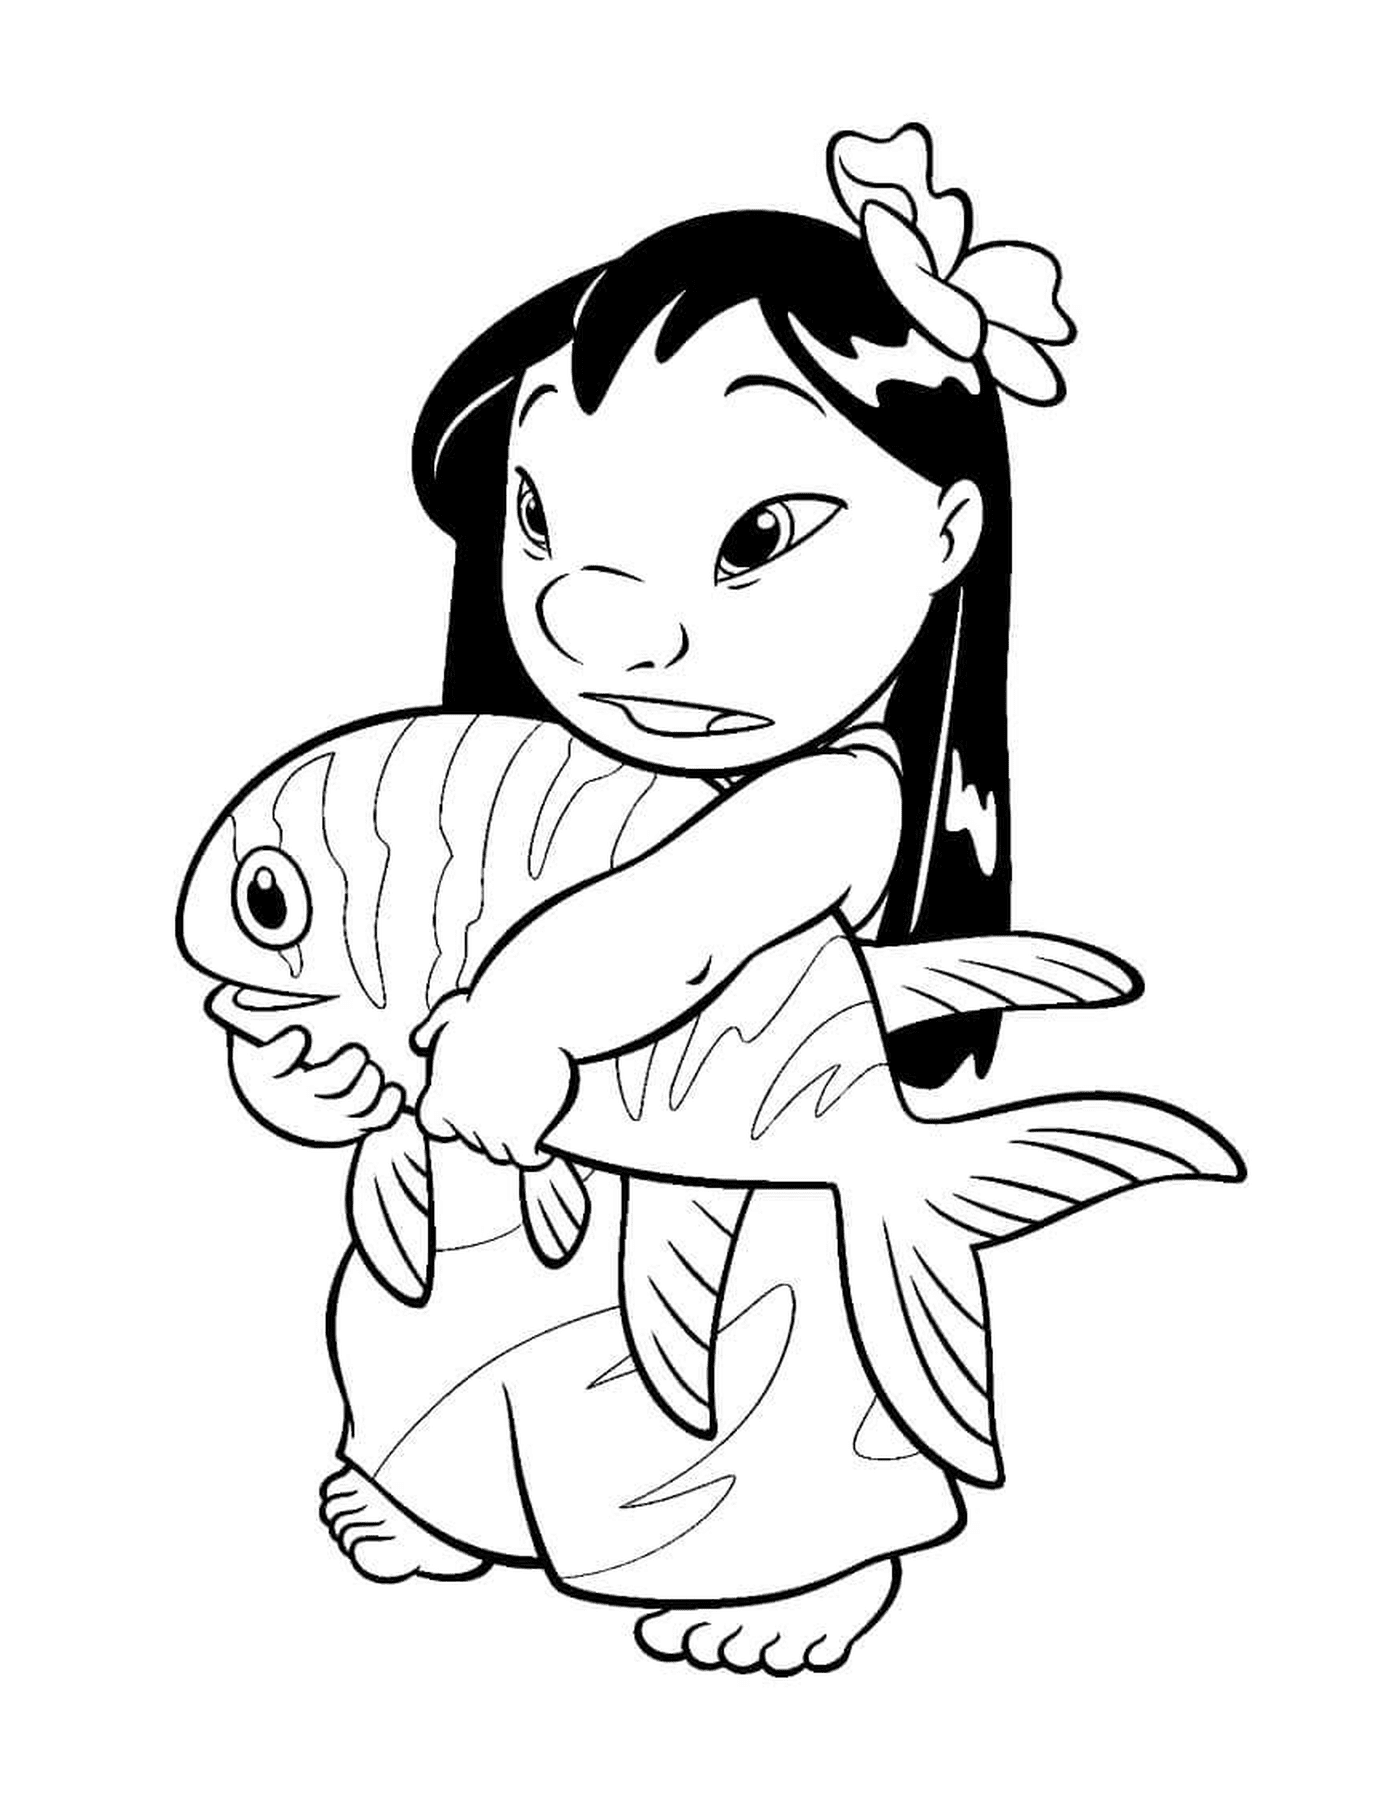  Stitch and Lilo with a fish 